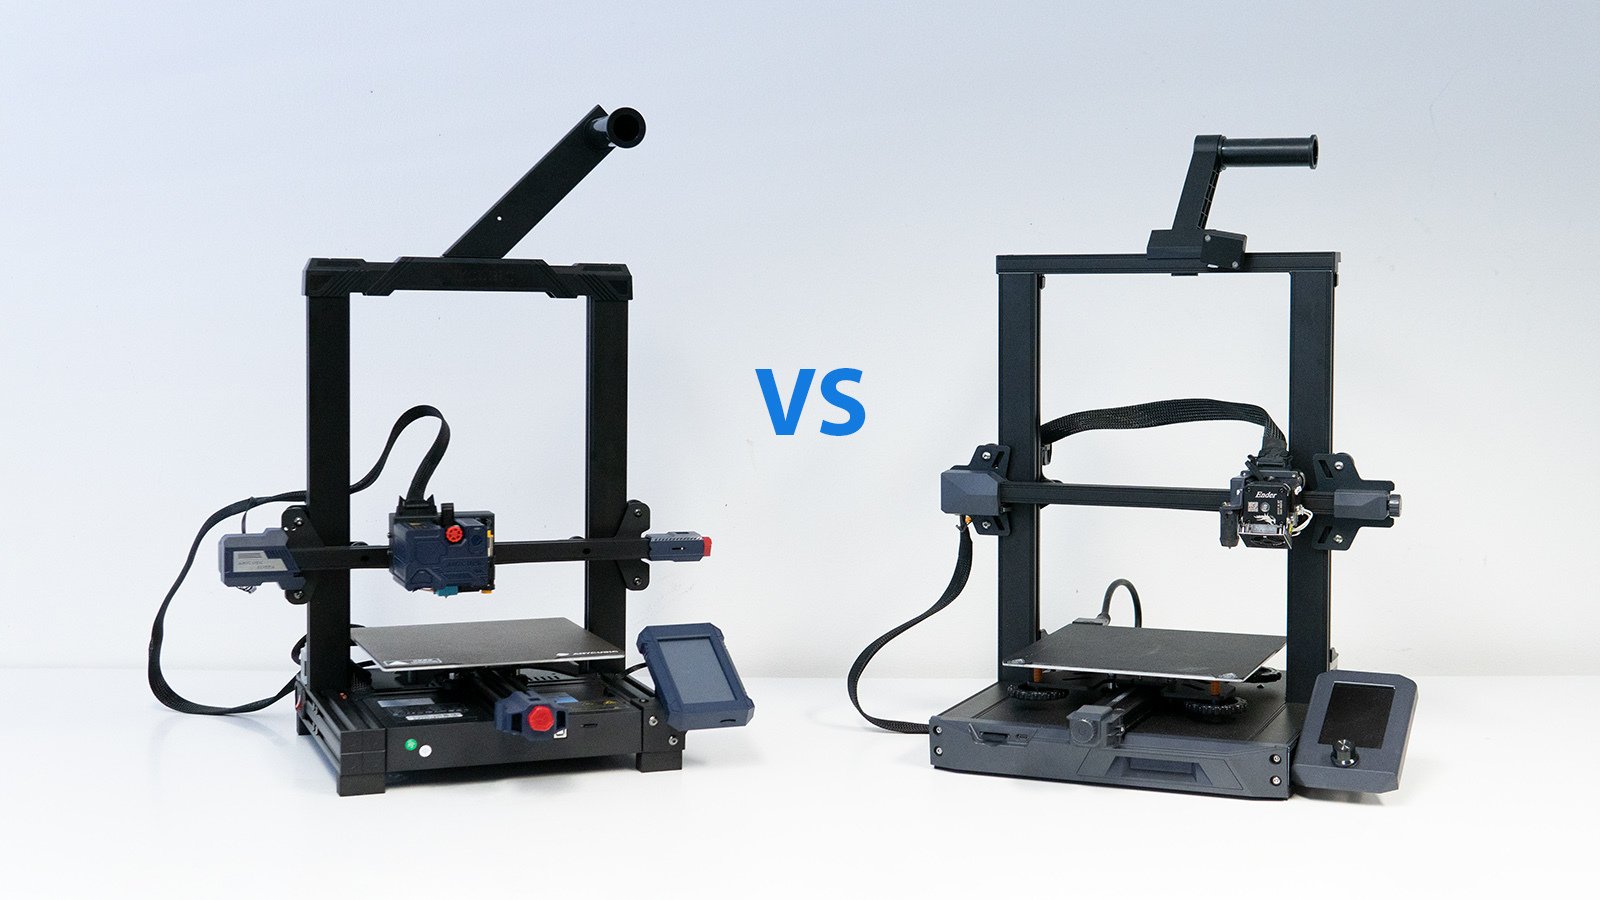 Anycubic Kobra vs Creality Ender 3 S1: The Differences